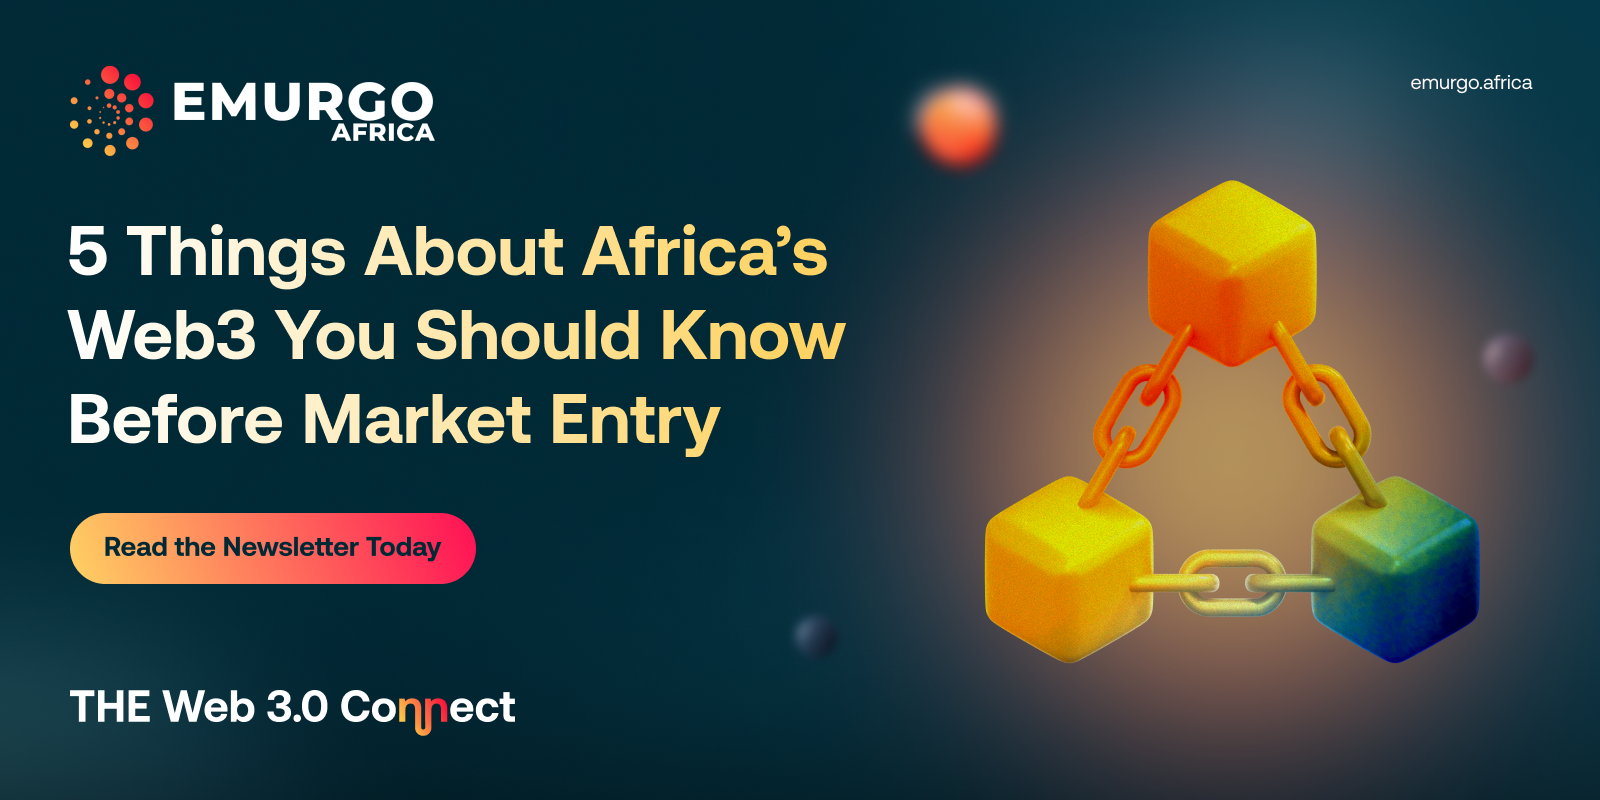 5 Things About Africa’s Web3 You Should Know Before Market Entry